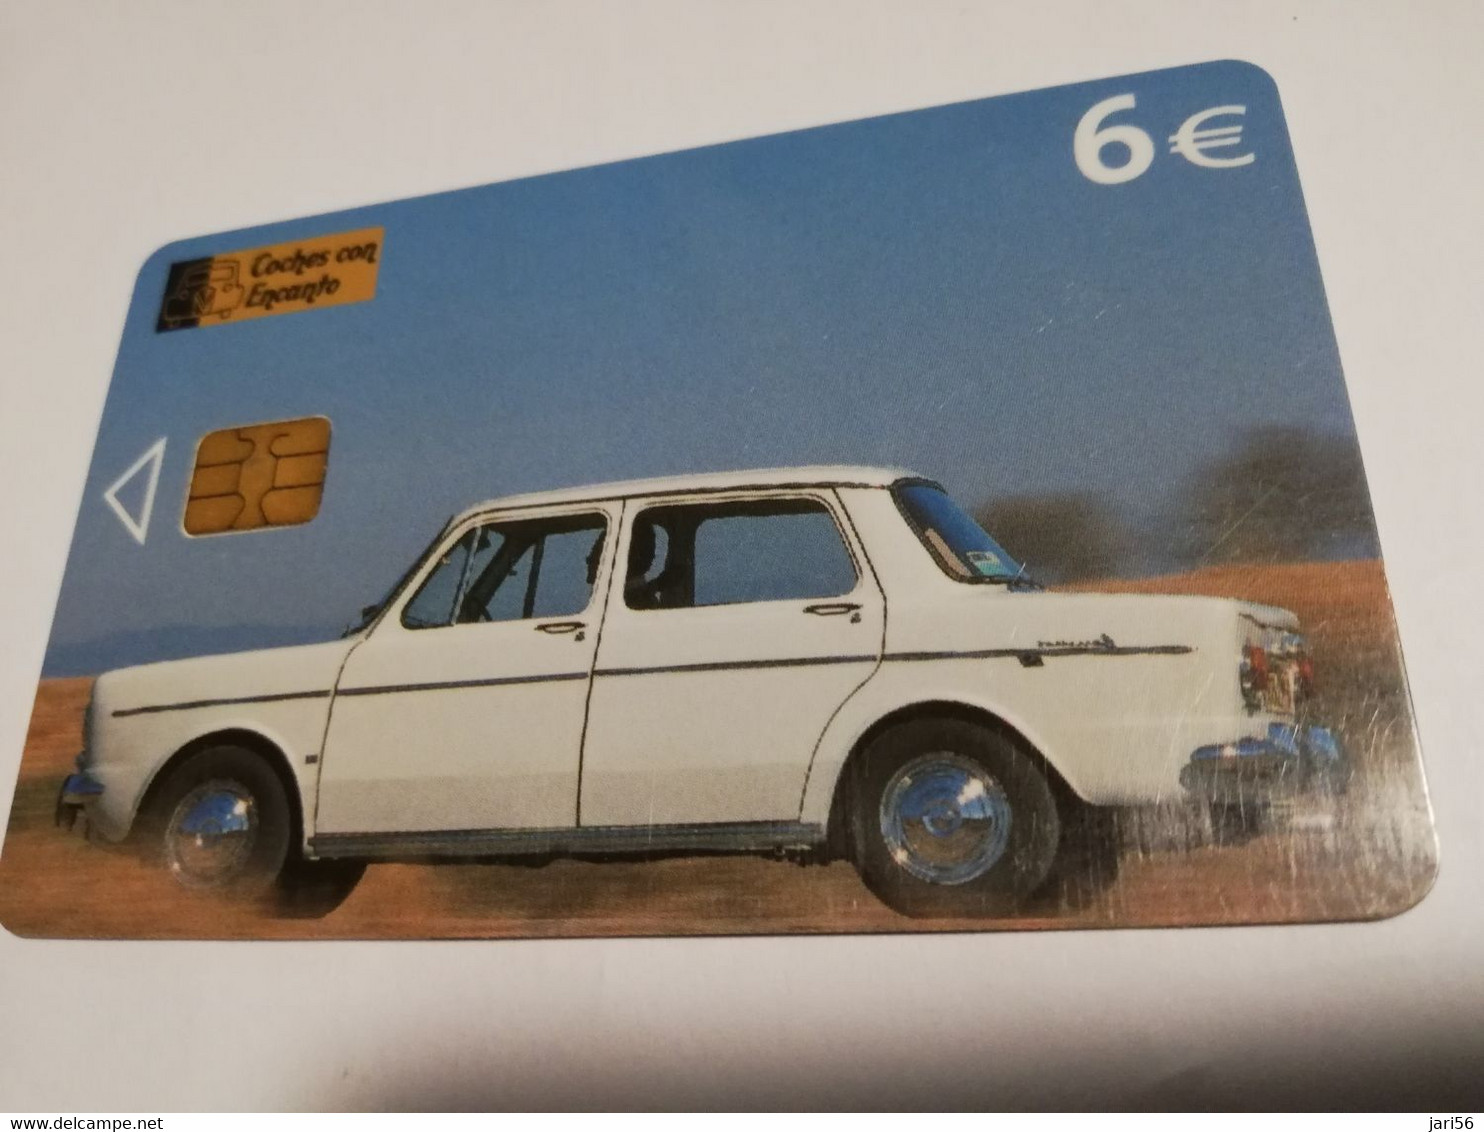 SPAIN/ ESPANA   € 6 ,- AUTOMOBILES SIMCA 1000   Nice  Fine Used  CHIP CARD  **3909** - Private Issues